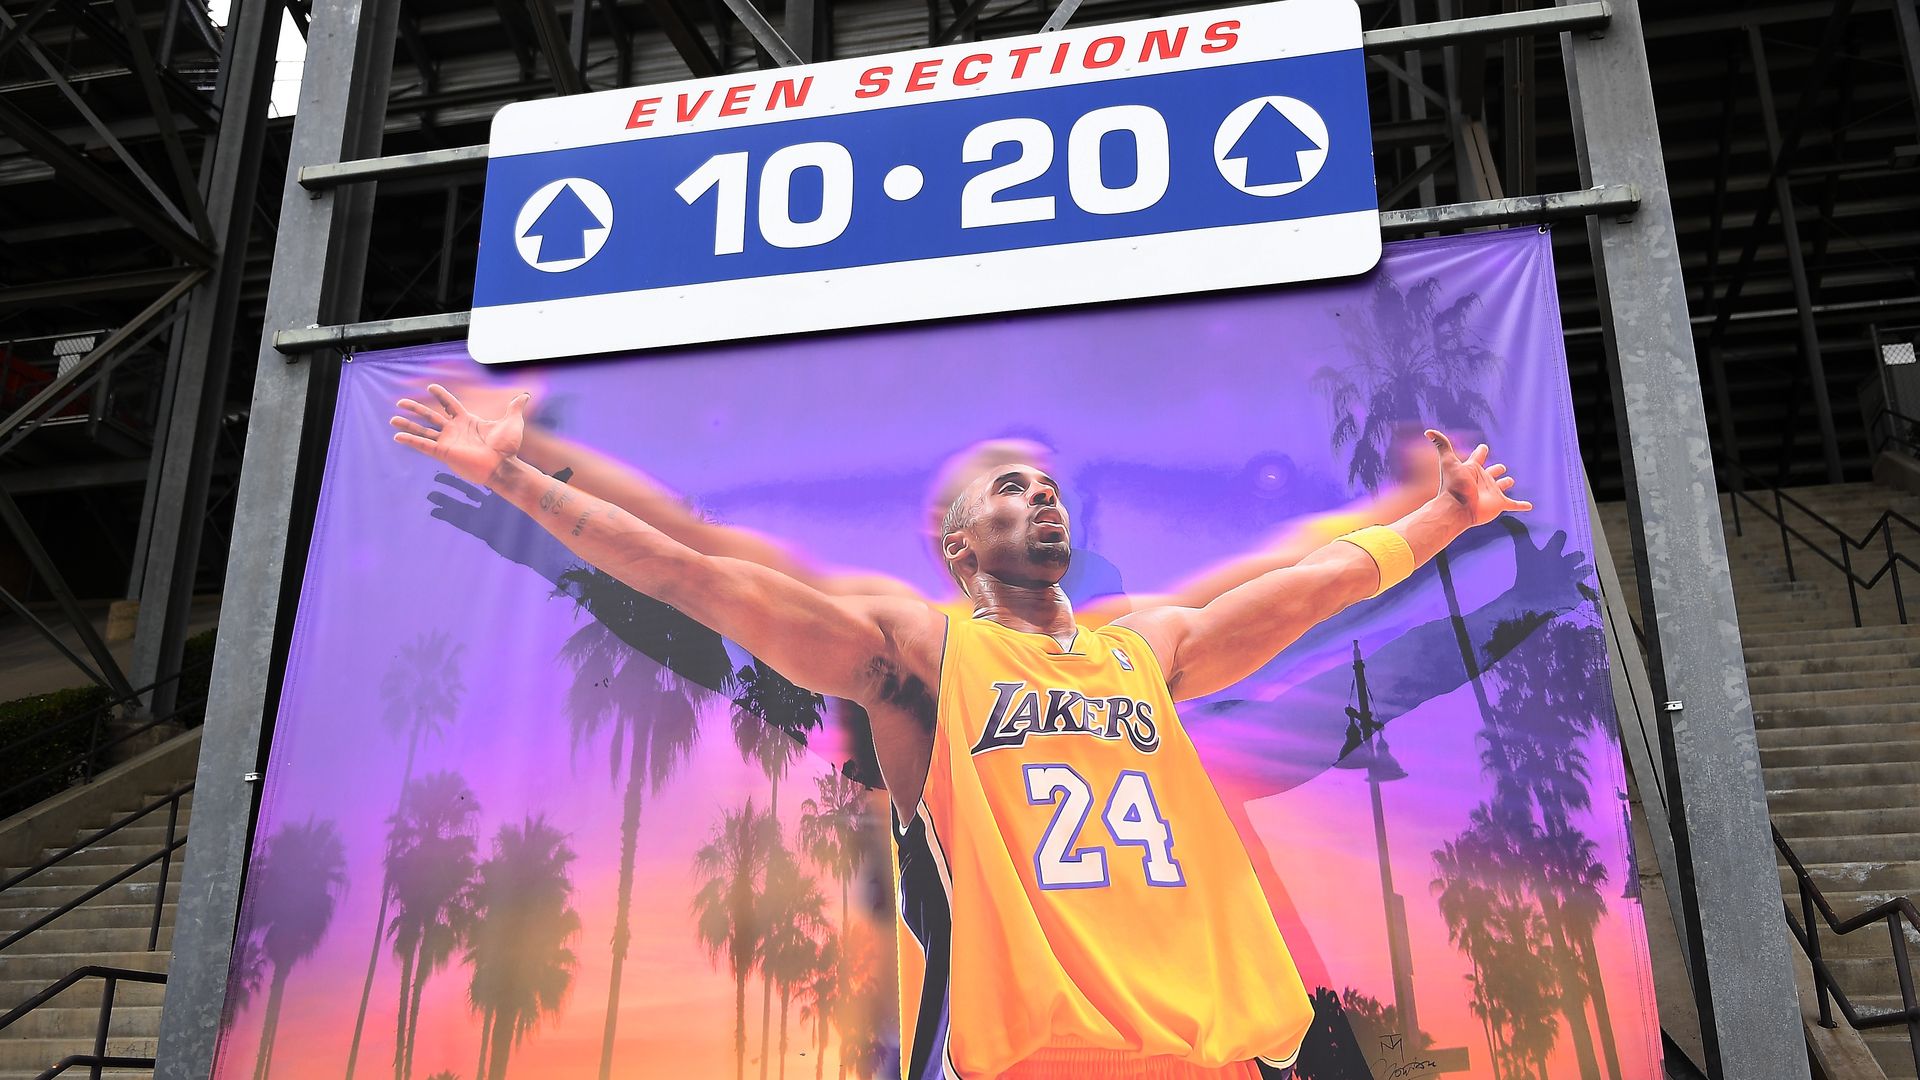 In this image, a mural of Kobe is displayed